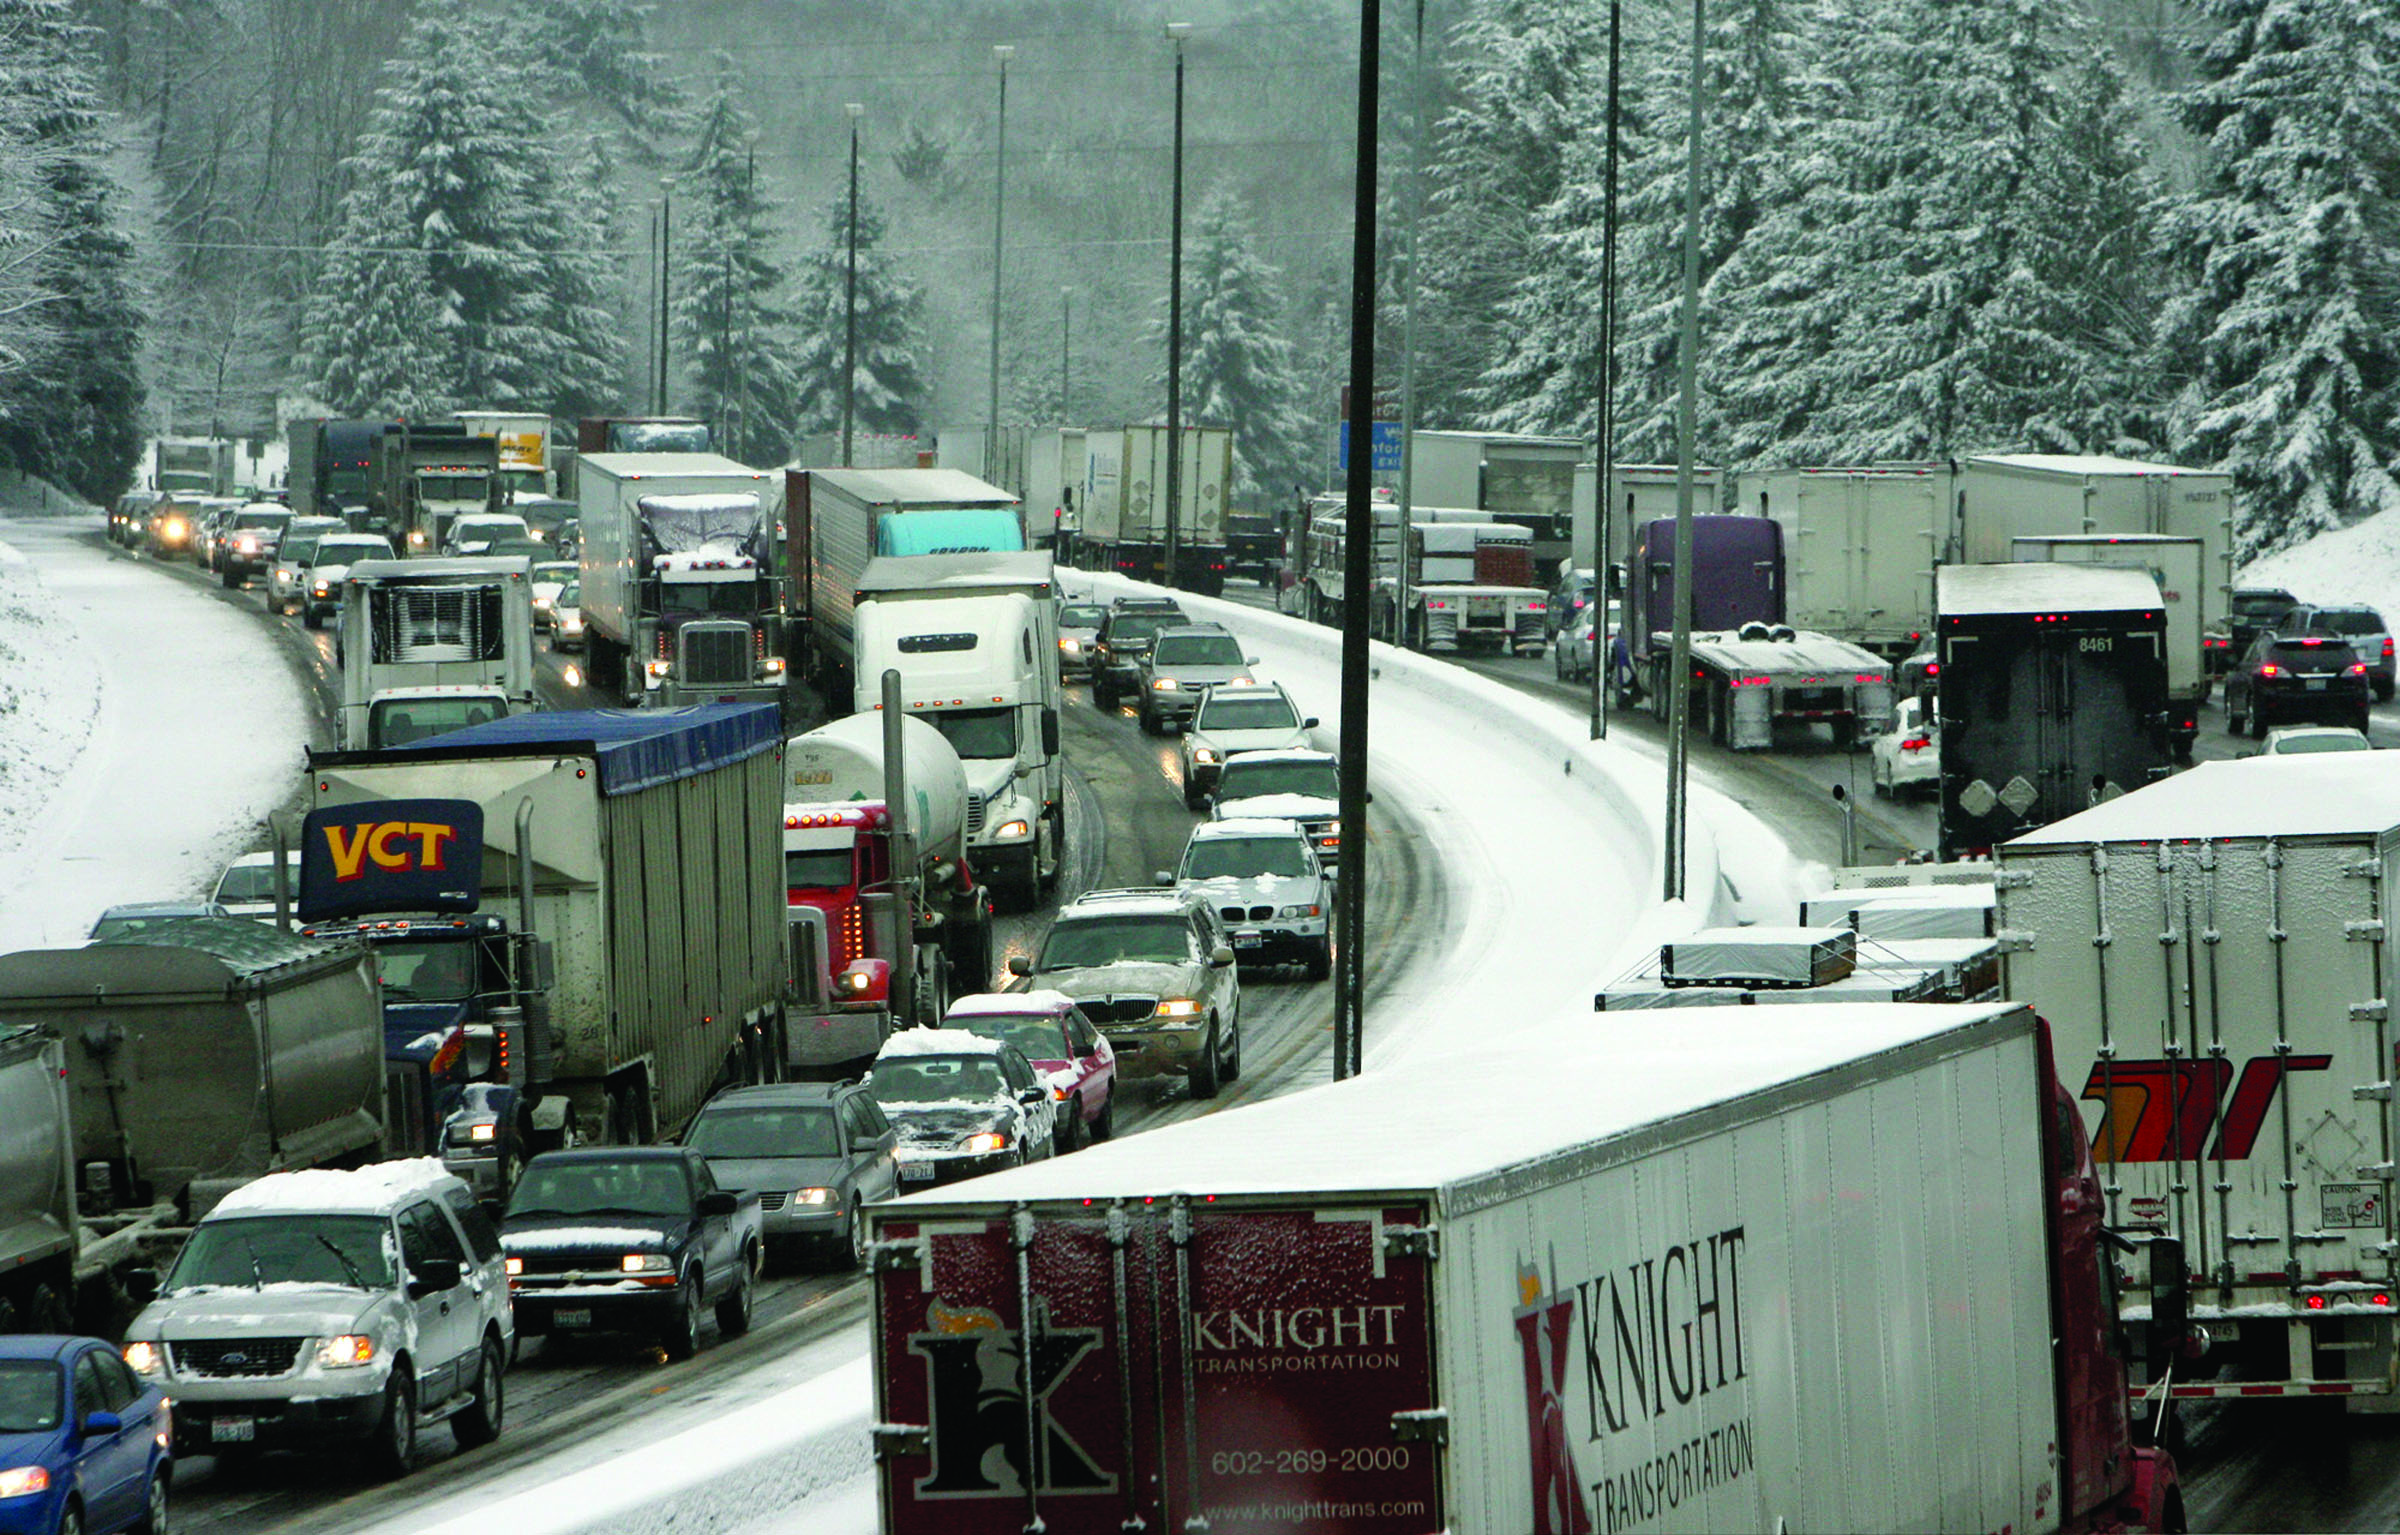 A snow storm leaves a commuting mess on Interstate 5 in Olympia in 2011. Many of the chemicals spread on highways to help winter drivers can damage the environment. Researchers at Washington State University are working on environmentally friendly ways that use less salt. — The Associated Press